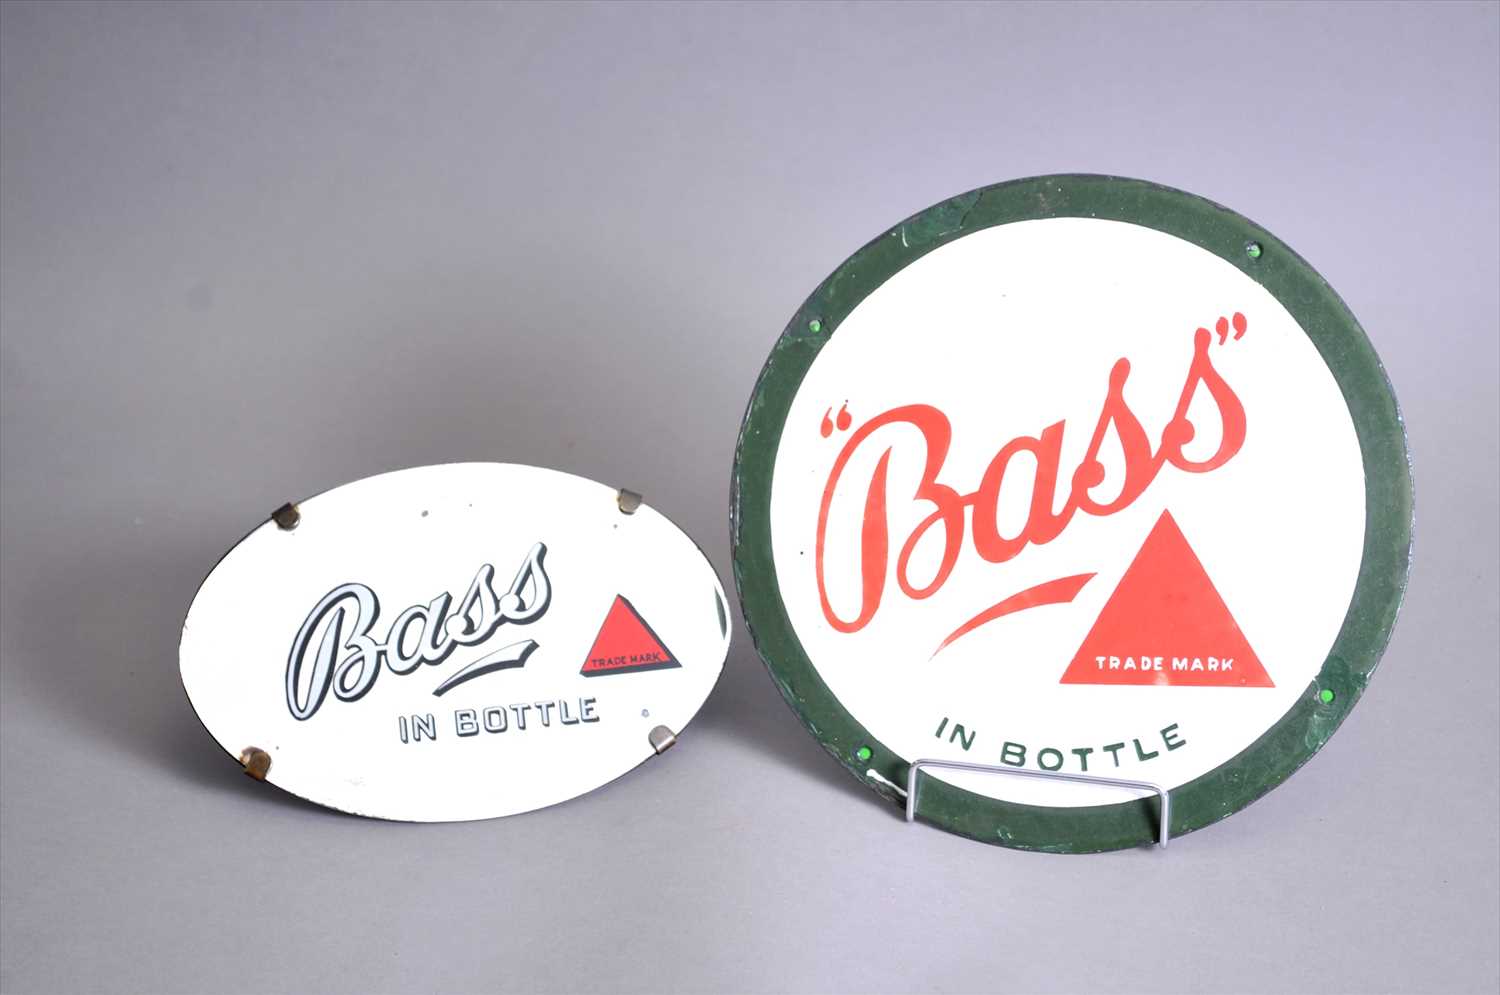 Lot 621 - A small original circular enamel " Bass" in bottle advertising sign and a Bass mirror